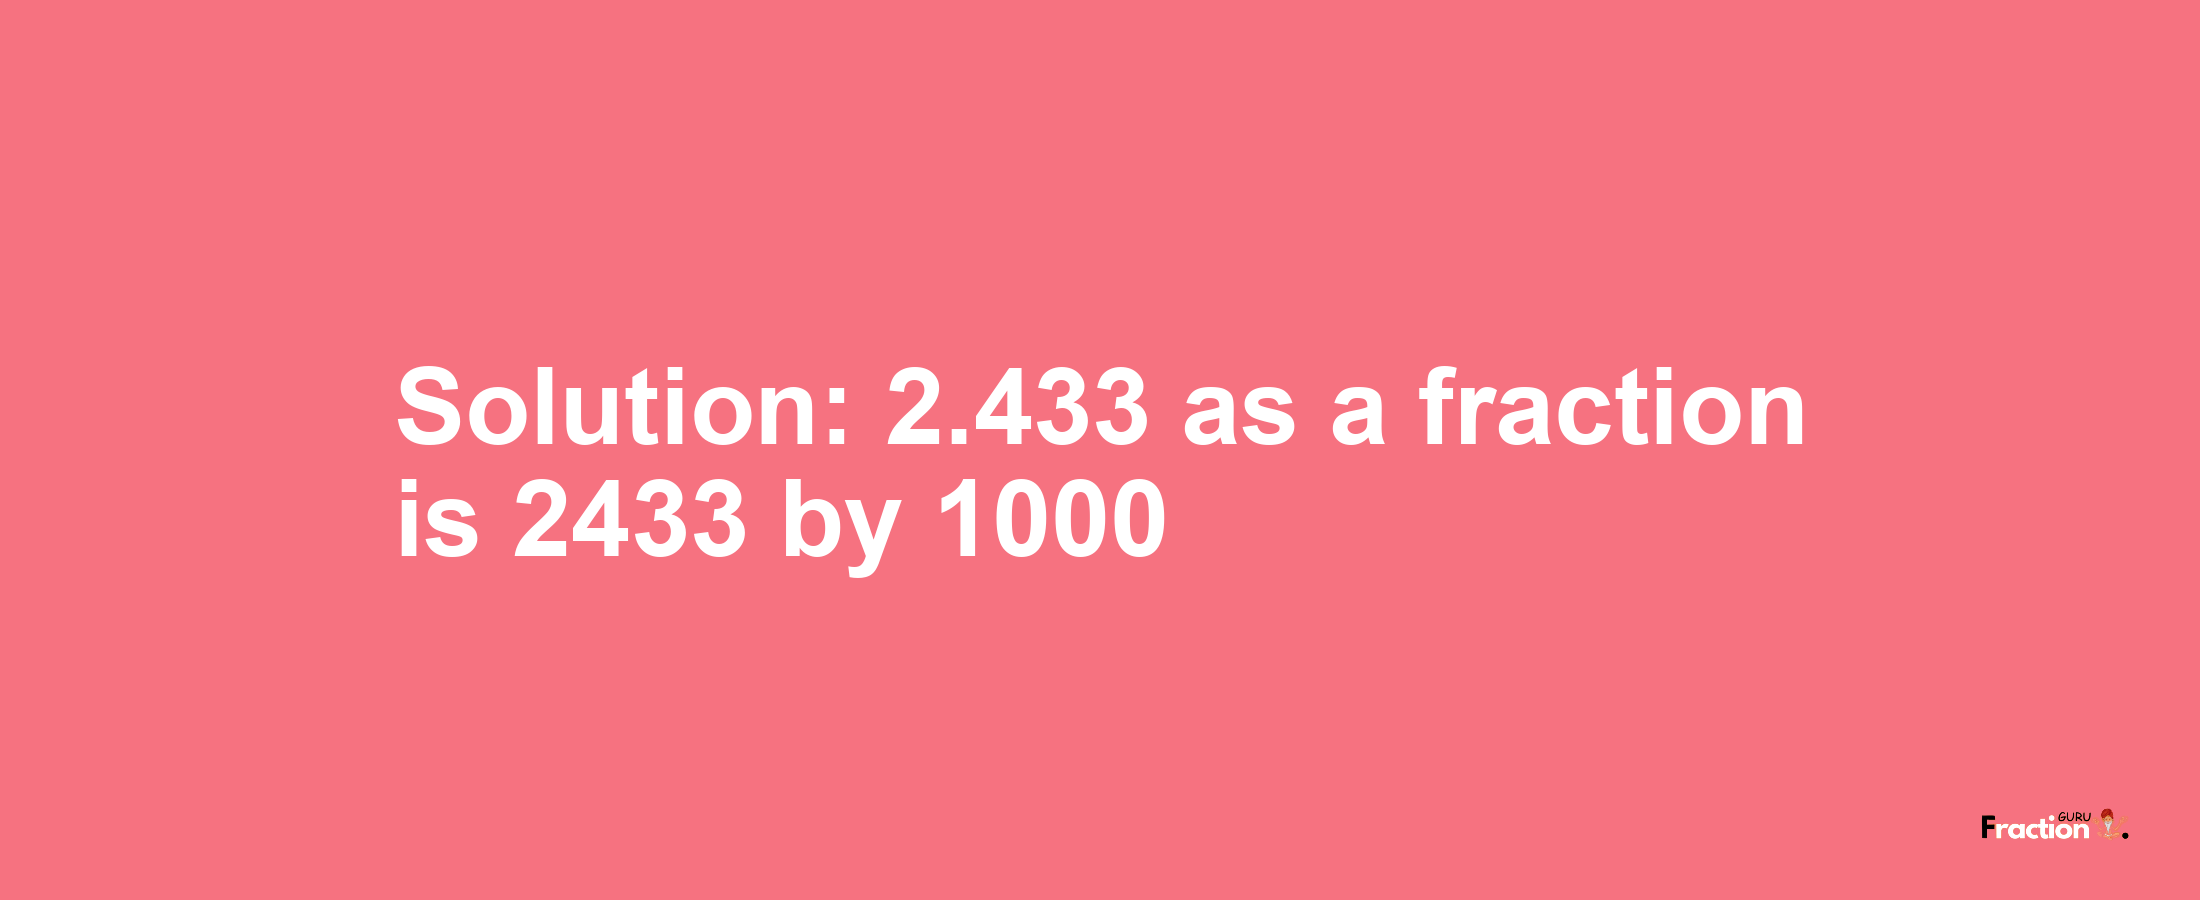 Solution:2.433 as a fraction is 2433/1000